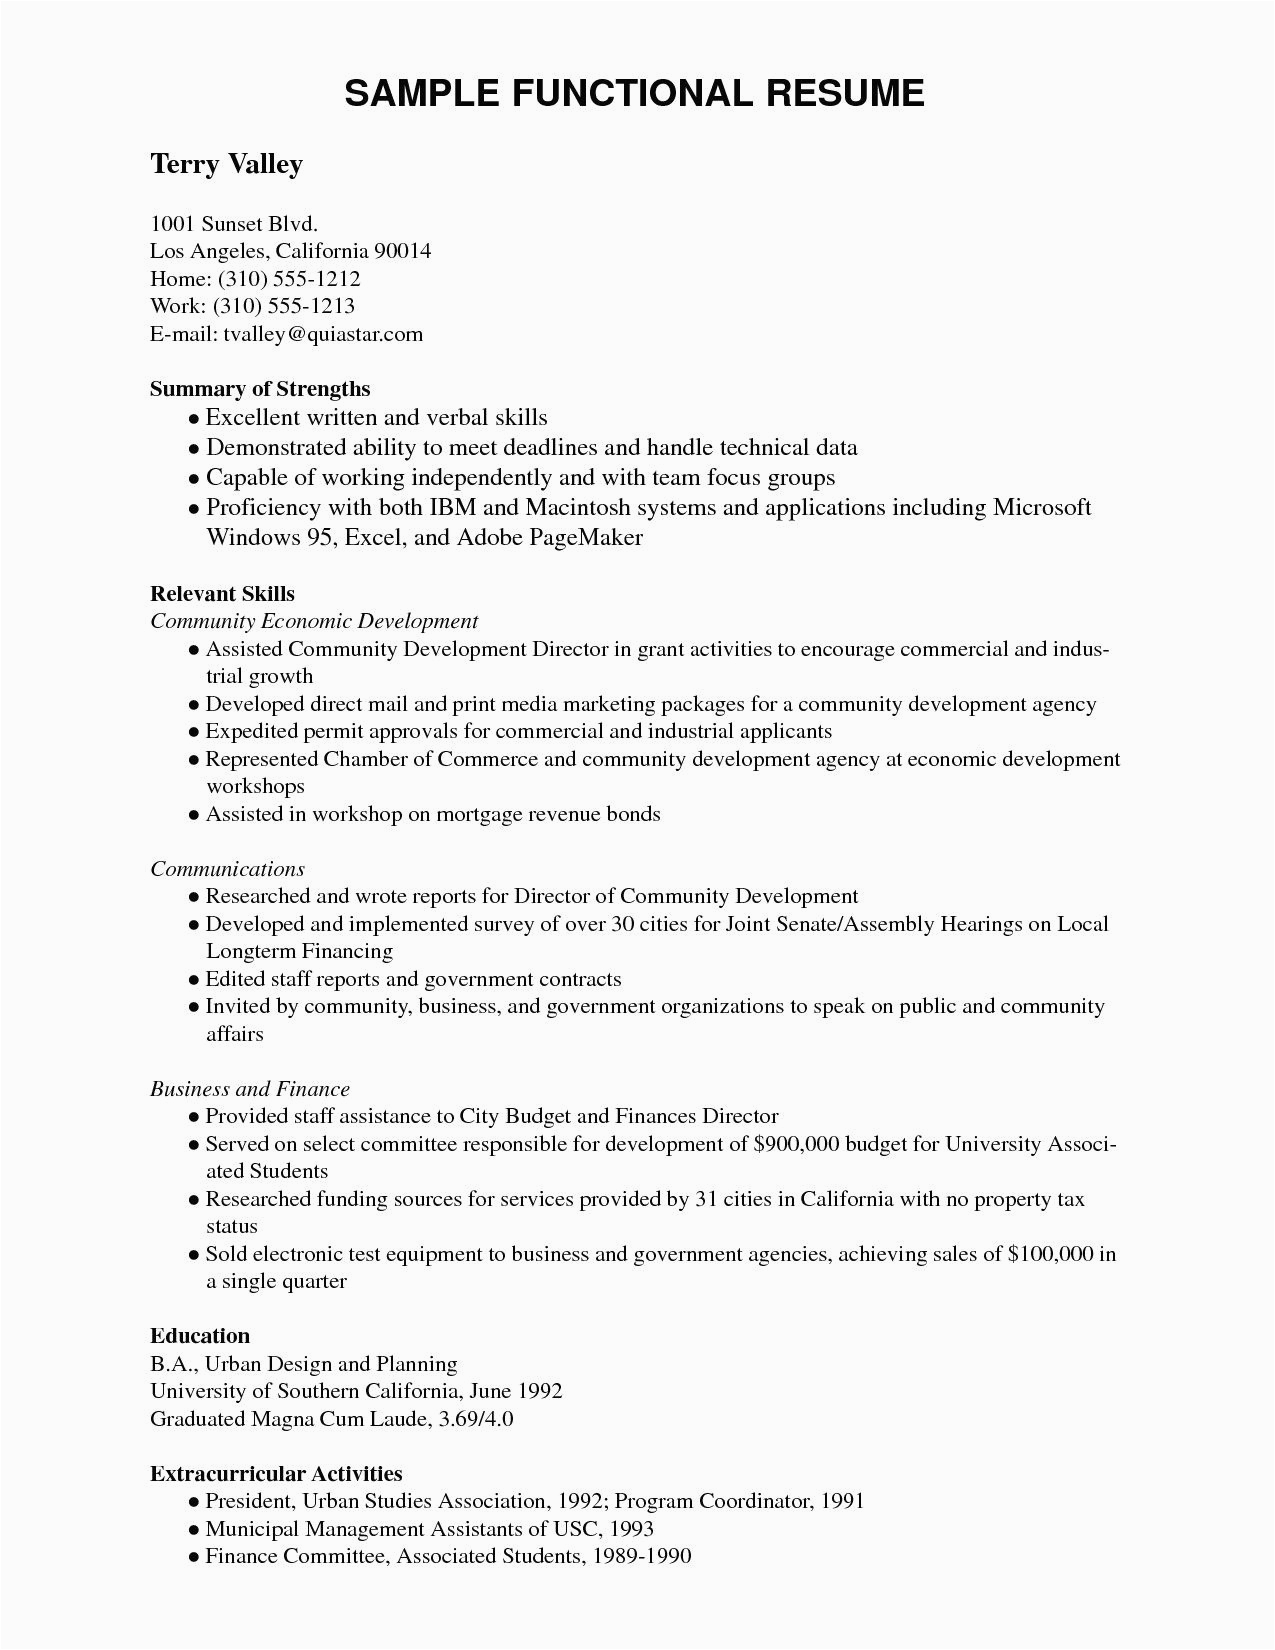 Extra Curricular Activities Sample for Resume 70 New Resume Examples for Extracurricular Activities